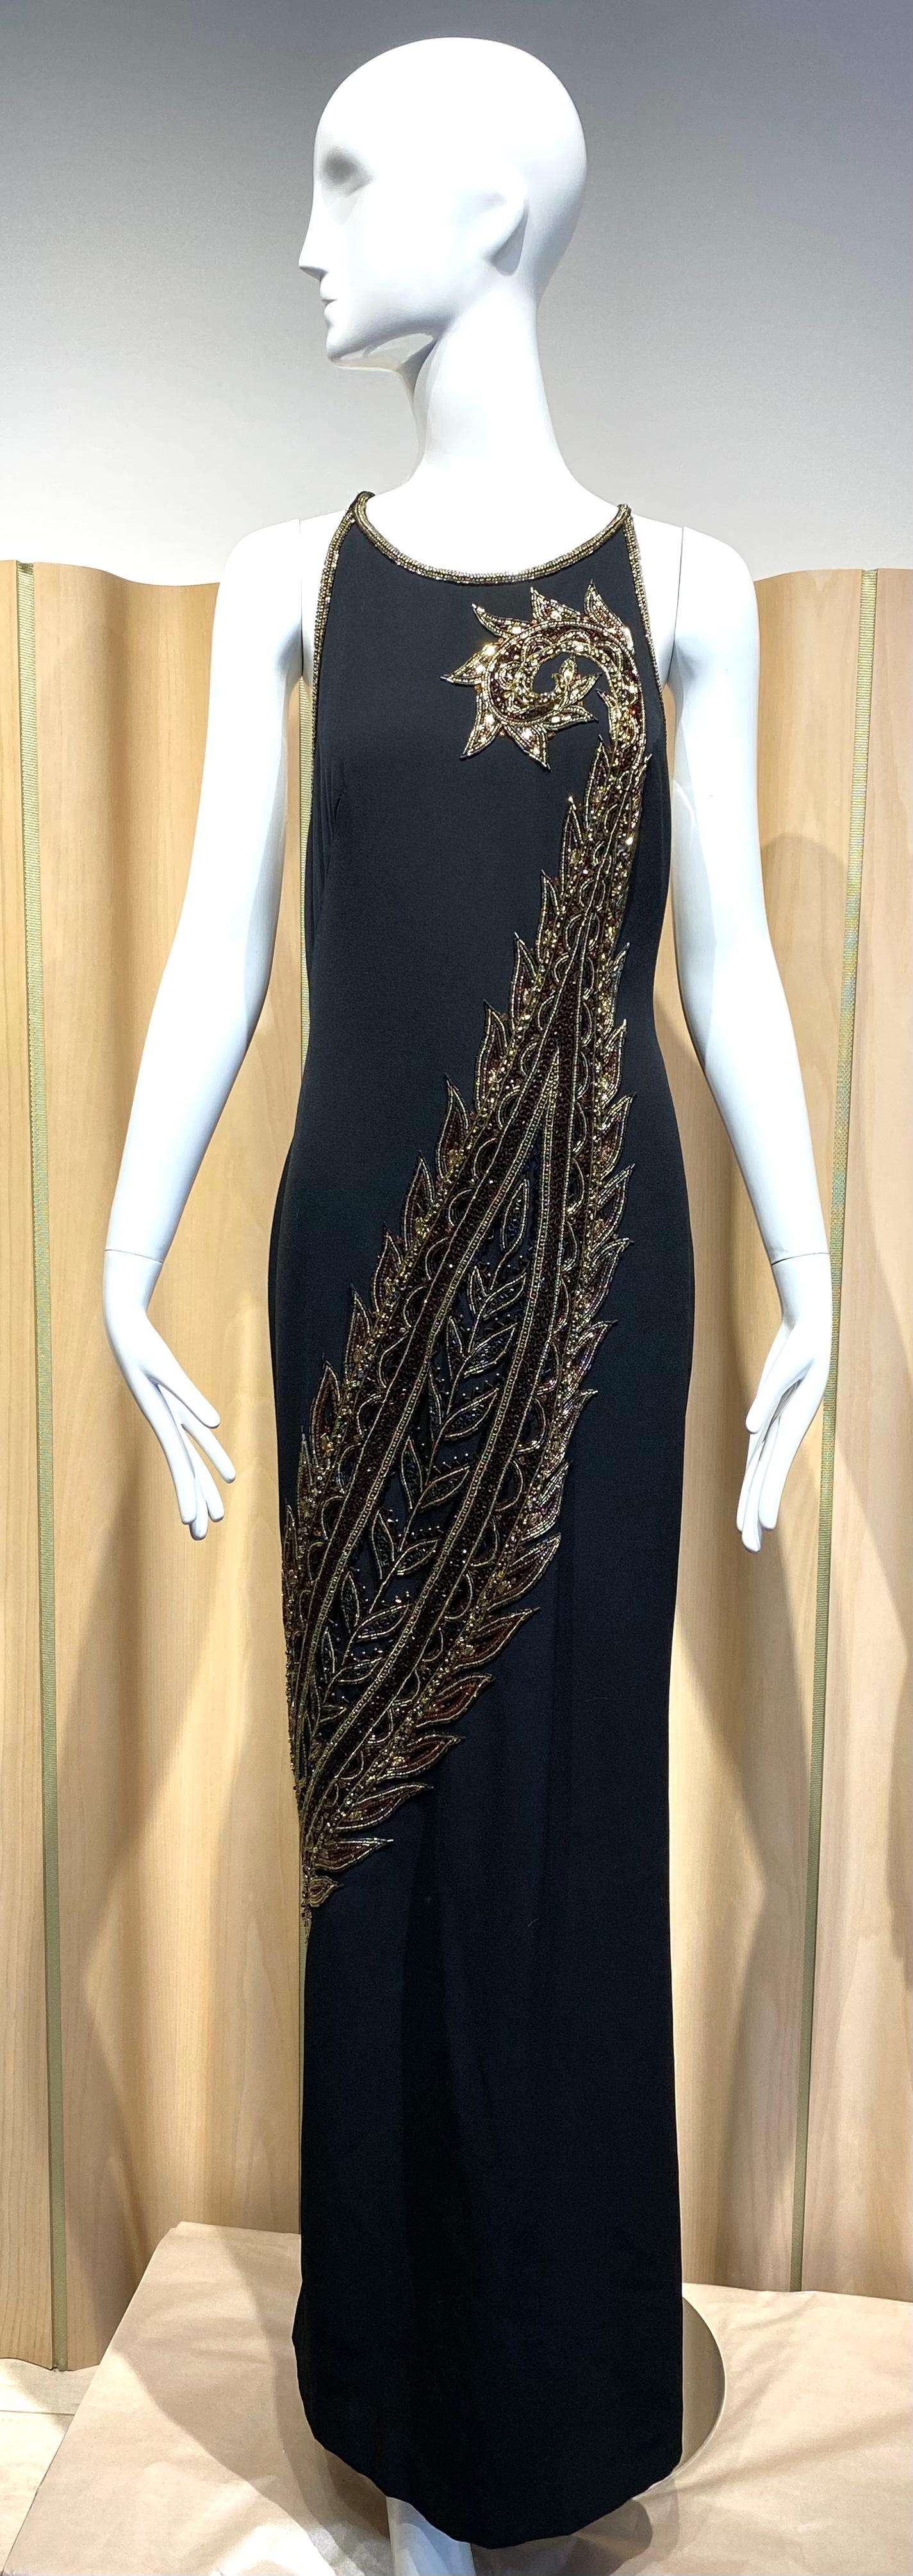 90s Bob Mackie Black crepe beaded racer back gown. Perfect for black tie or bridal.
Fit size 4-6
Measurement :
Bust: 34”/ Waist 32” / Hip 38.5/ 